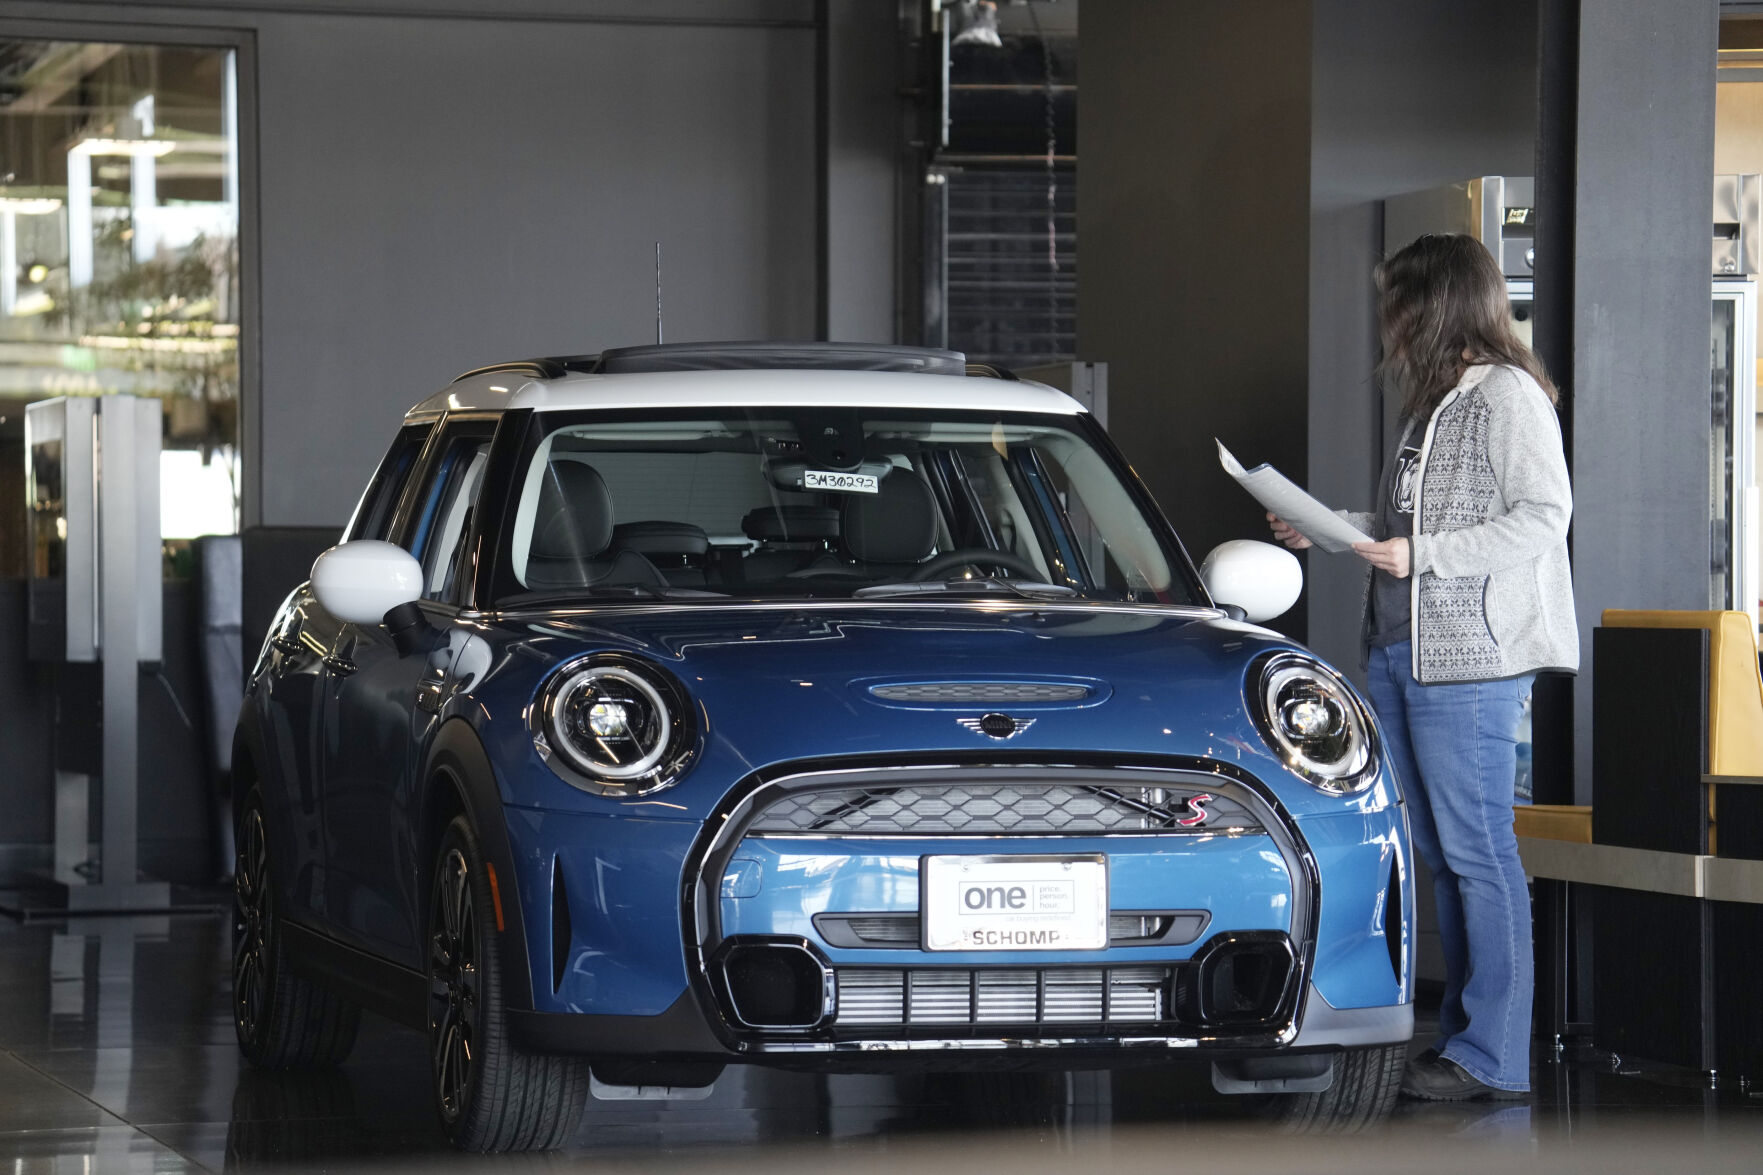 <p>A potential buyer looks over a 2023 Cooper S sedan on the floor of a Mini dealership Friday, Feb. 17, 2023, in Highlands Ranch, Colo. Over the past year, the Fed has raised its key short-term rate eight times, causing many kinds of consumer and business loans, including auto loans, to become more expensive. (AP Photo/David Zalubowski)</p>   PHOTO CREDIT: David Zalubowski 